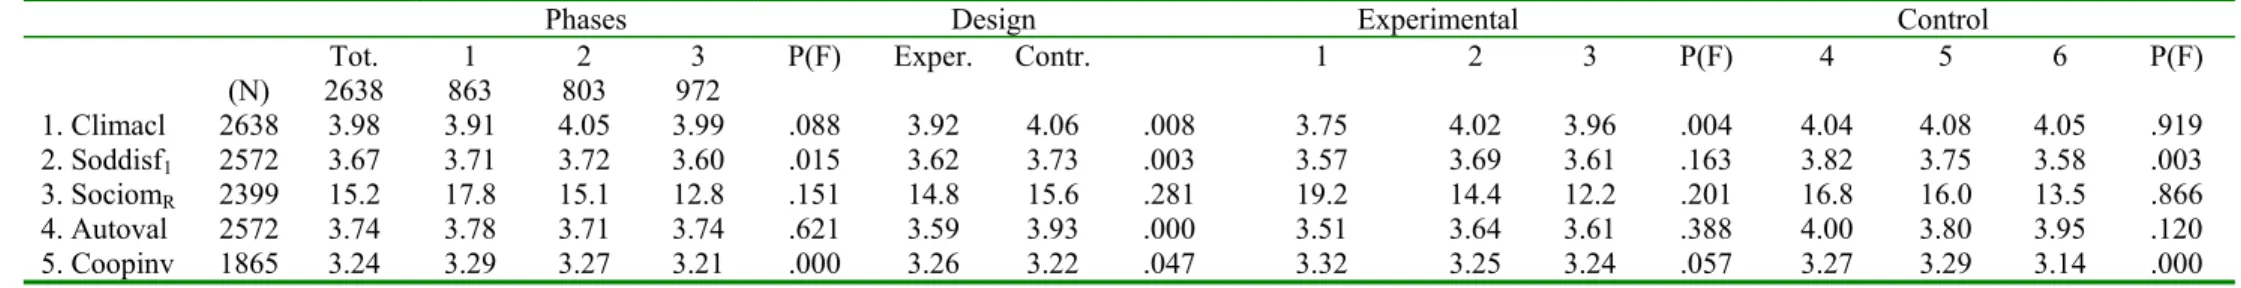 Table 3.1. The synthetic results: Before/After, Experimental/Control 